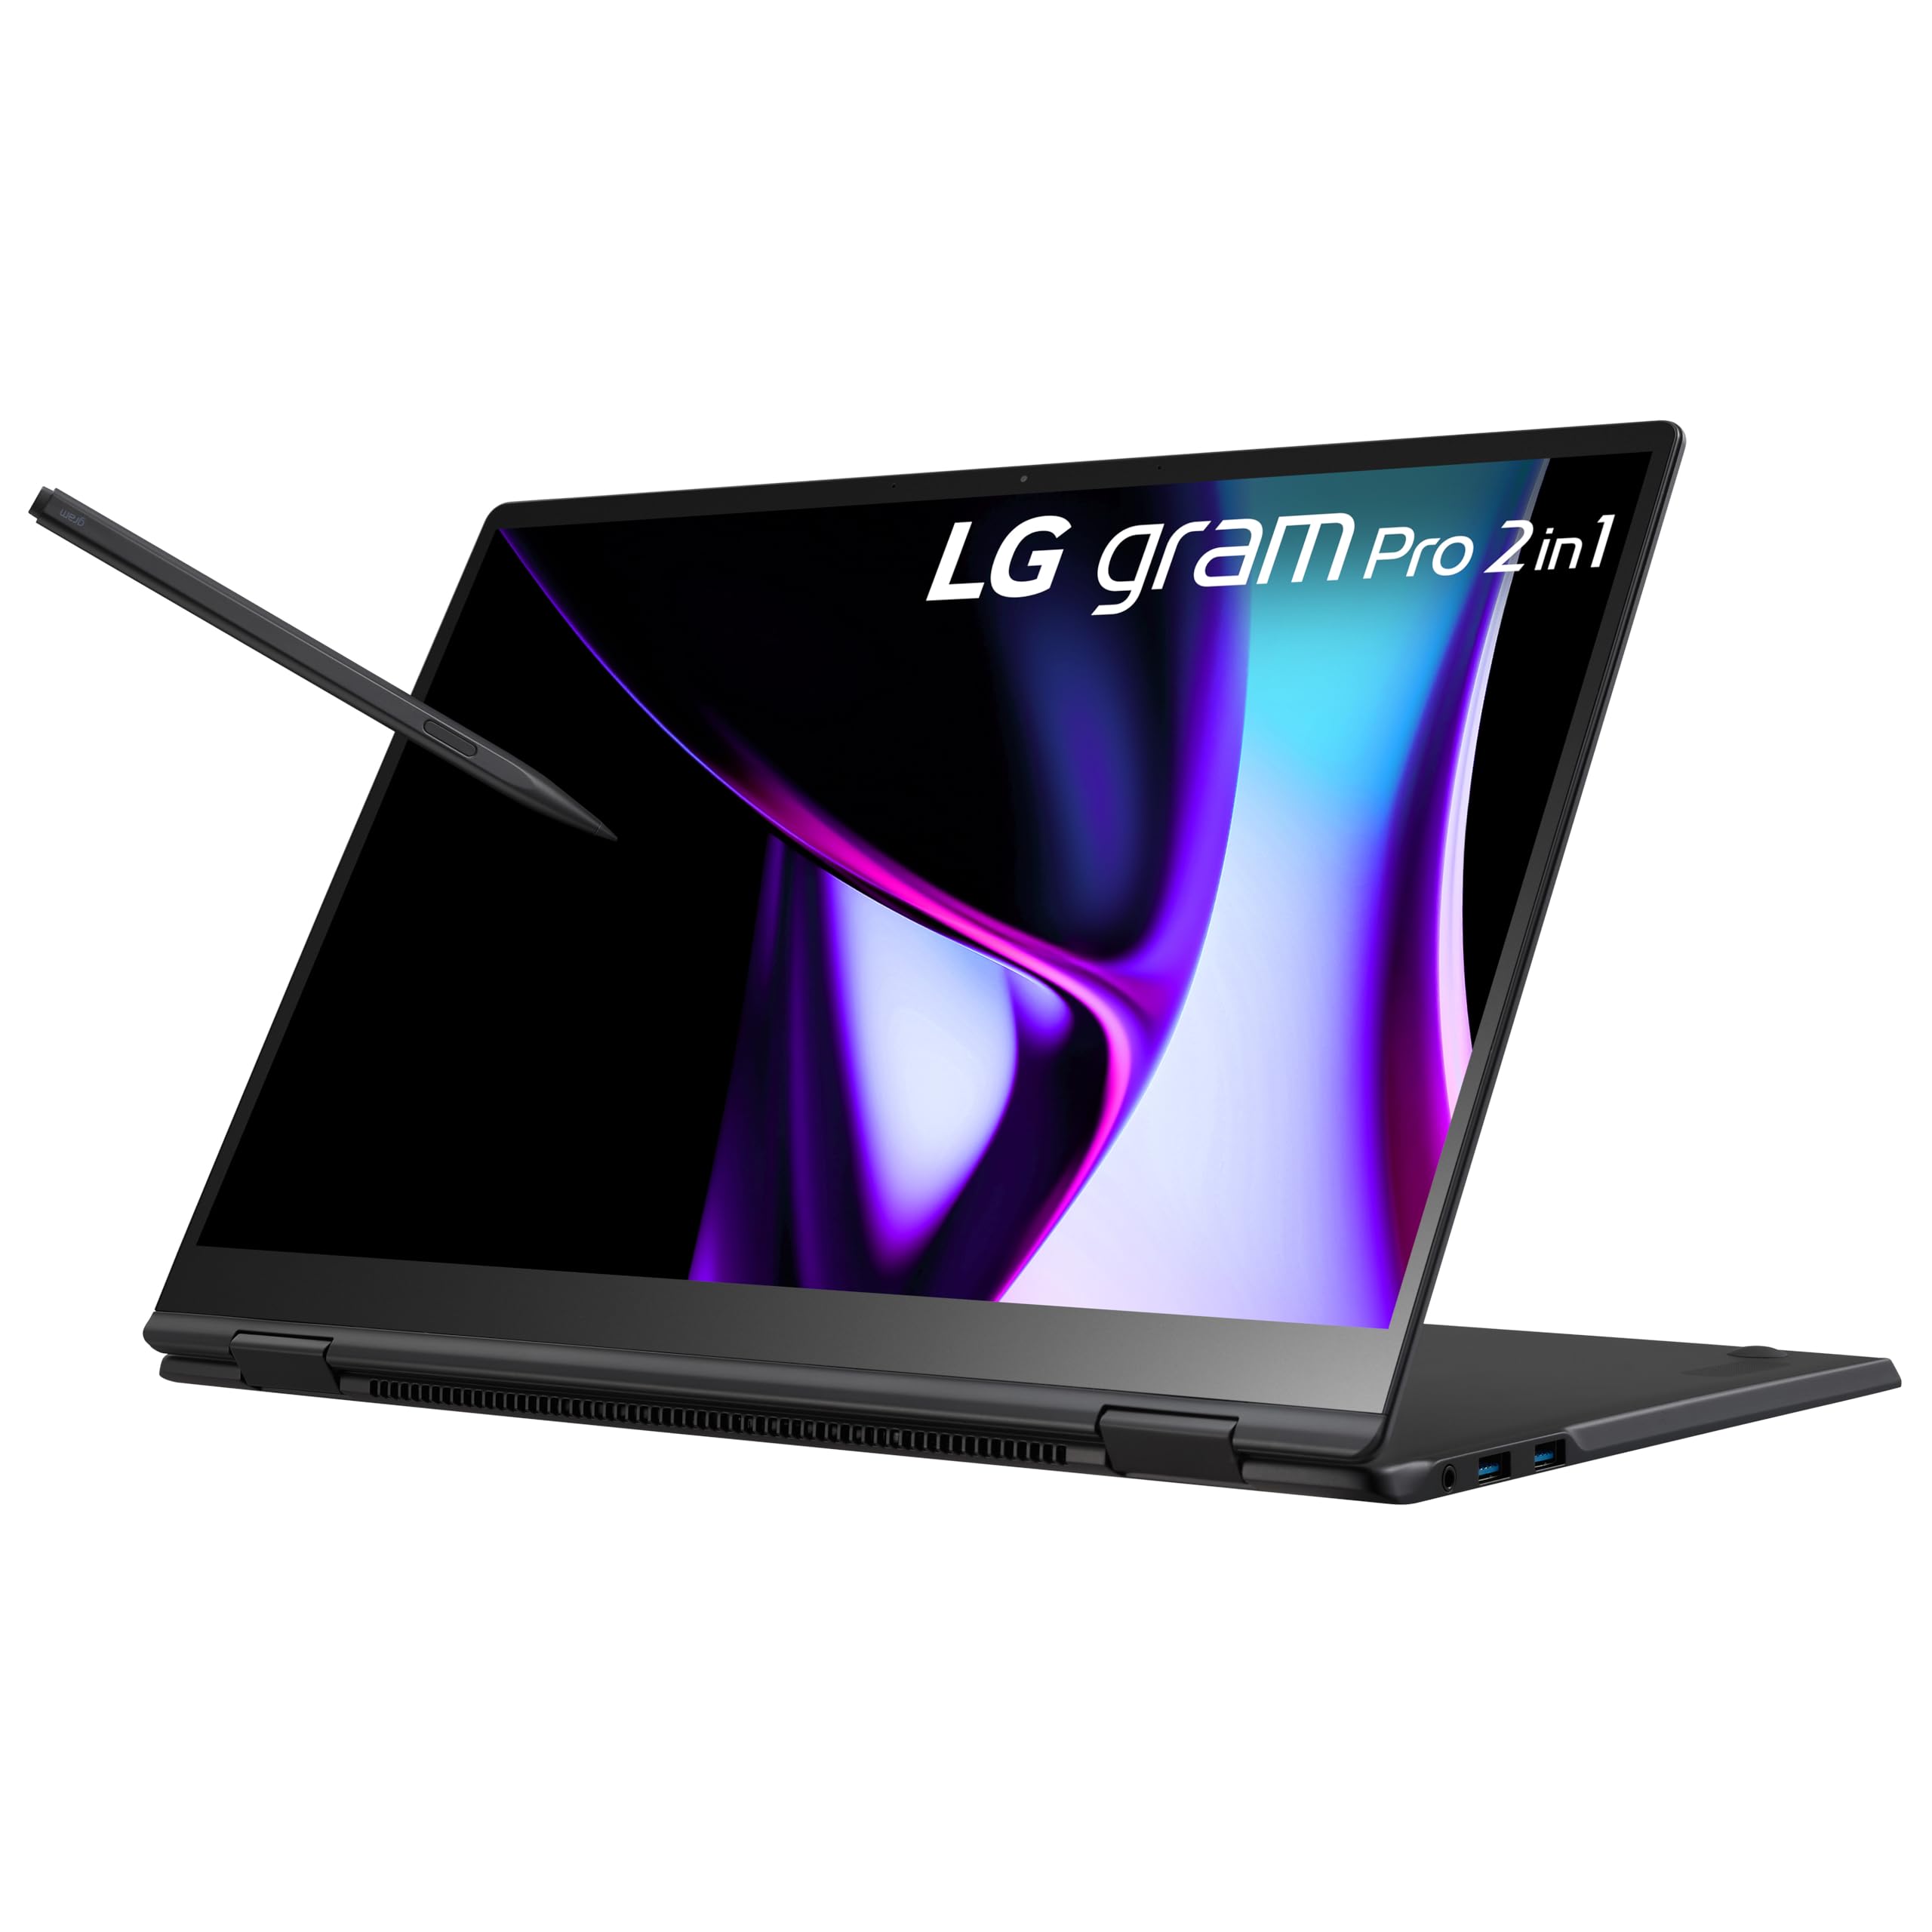 LG Gram Pro 2in1 16-inch Lightweight and Versatile Laptop, Intel Evo Edition - Intel Core Ultra 7, 32GB RAM, 2 TB SSD with OLED Touch Display